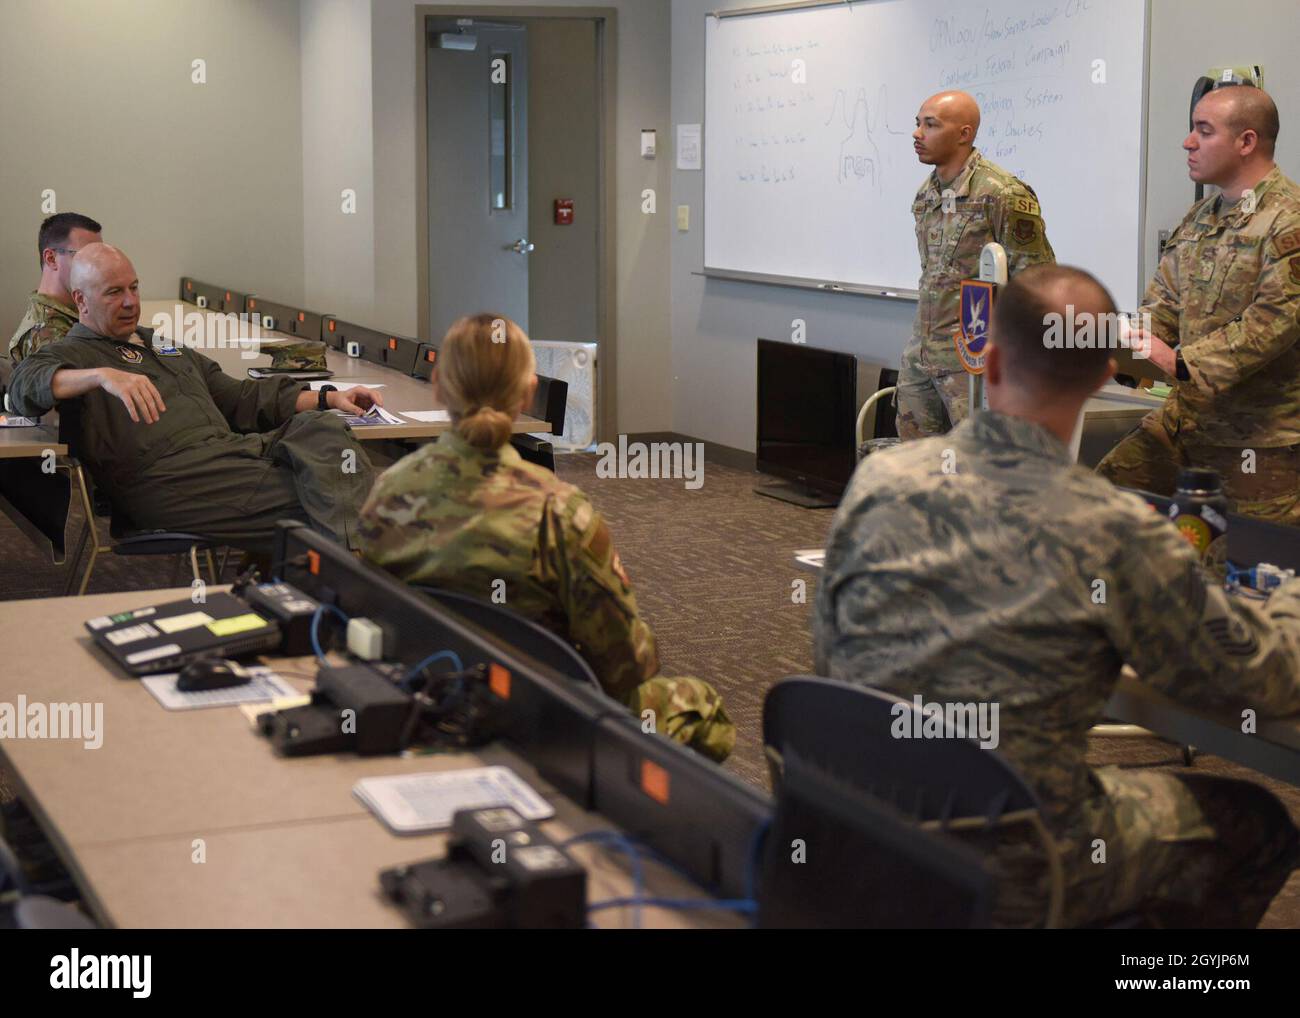 Maj. Gen. Brian Borgen, 10th Air Force commander, receives a mission brief from members of the 710th Security Forces Squadron at Buckley Air Force Base, Colo., Jan. 9, 2019. Borgen was briefed on some of the challenges that the 710th SFS faces that he might be able to help fix. (U.S. Air Force photo by Airman 1st Class Haley N. Blevins) Stock Photo